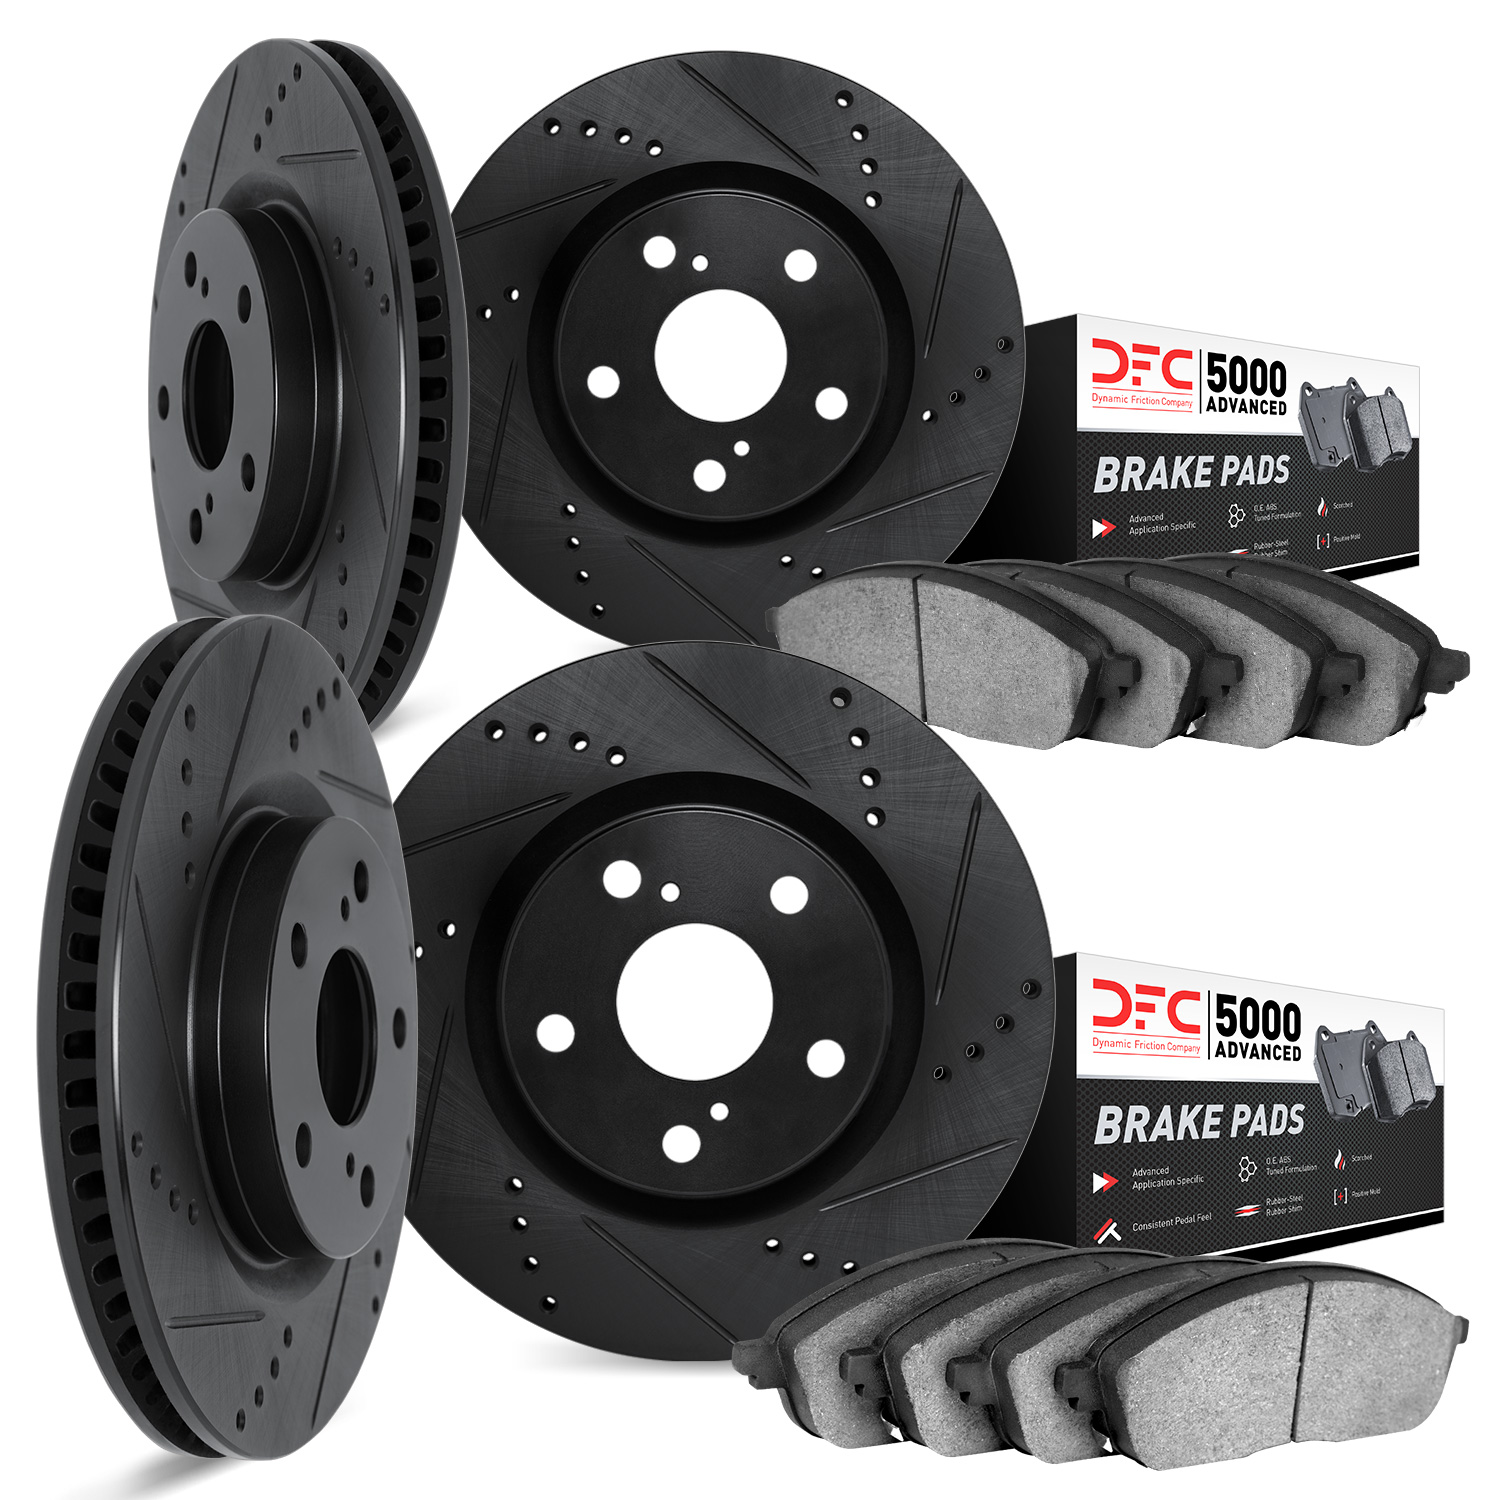 8504-68010 Drilled/Slotted Brake Rotors w/5000 Advanced Brake Pads Kit [Black], Fits Select Infiniti/Nissan, Position: Front and